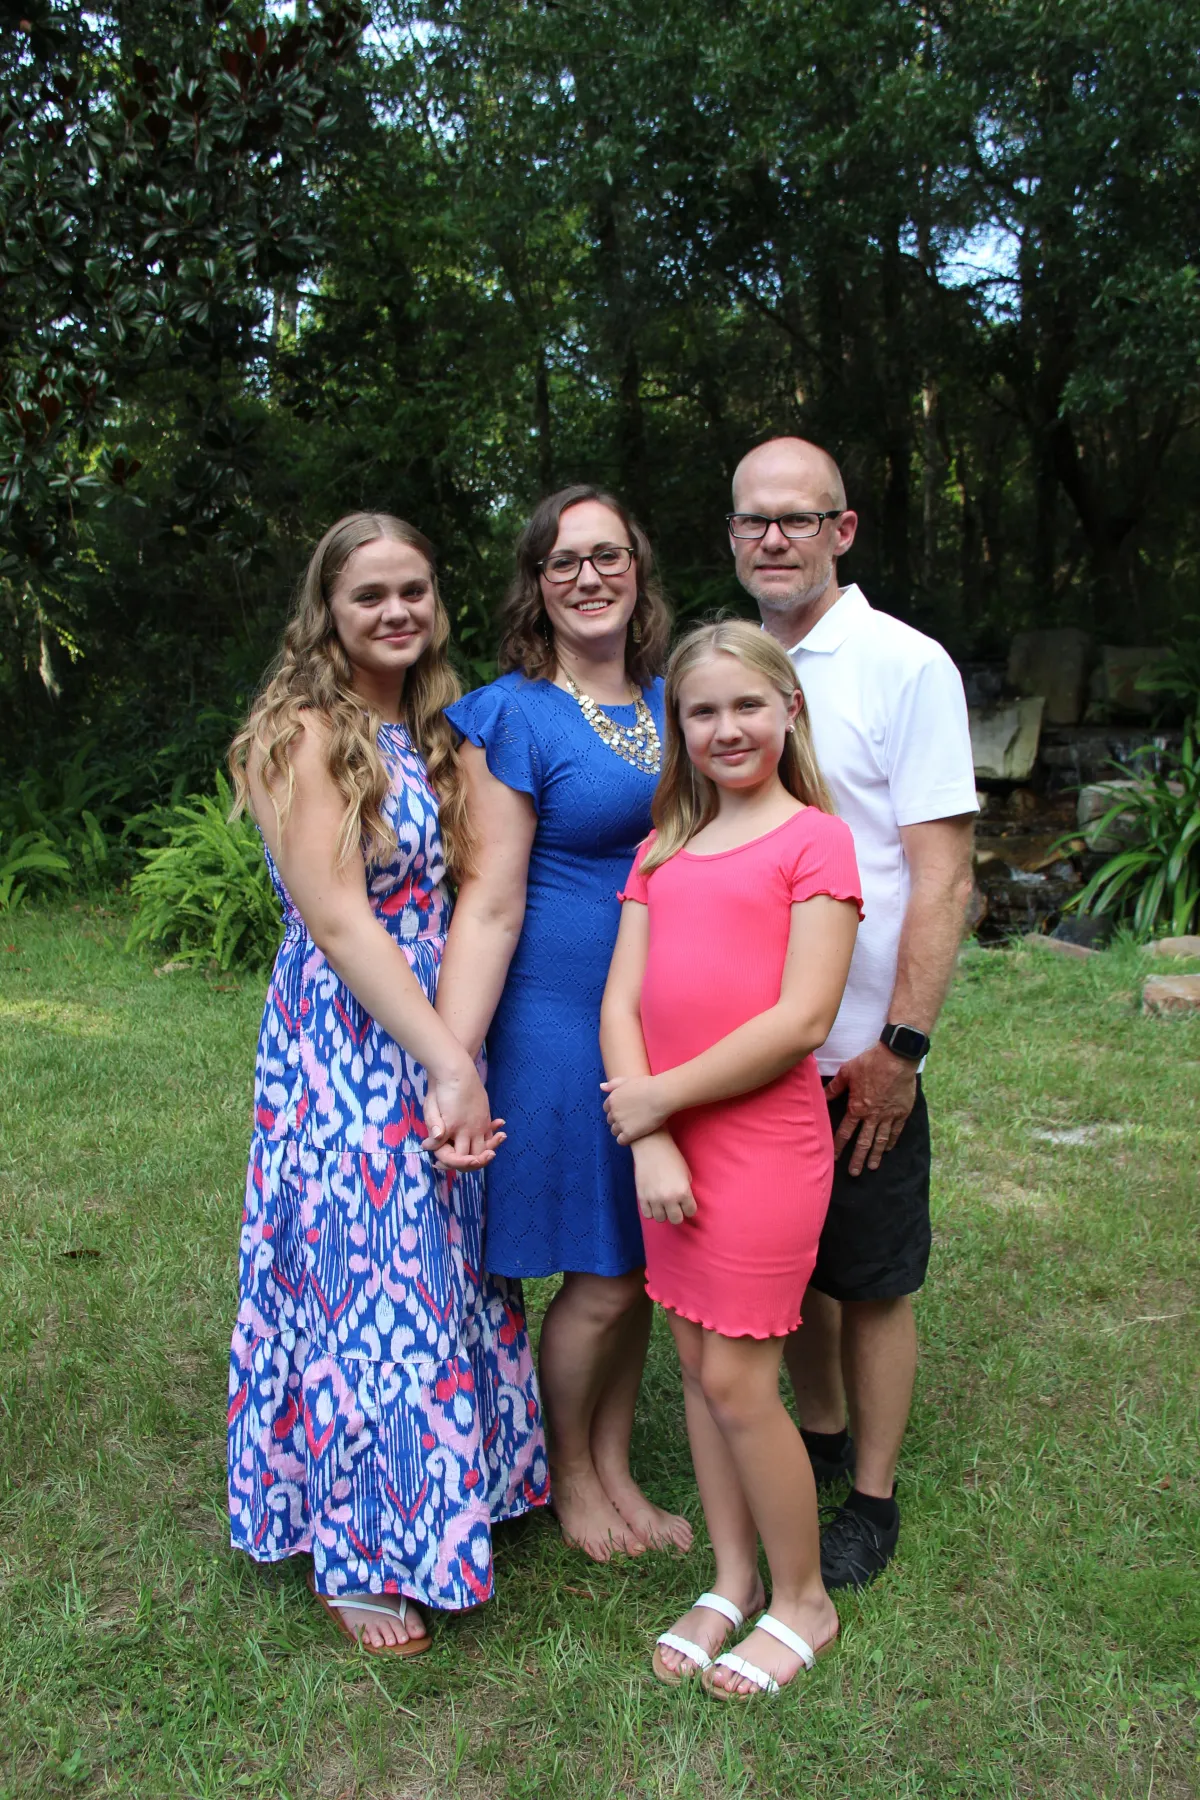 Dr. Brooke Silberhorn and her family.